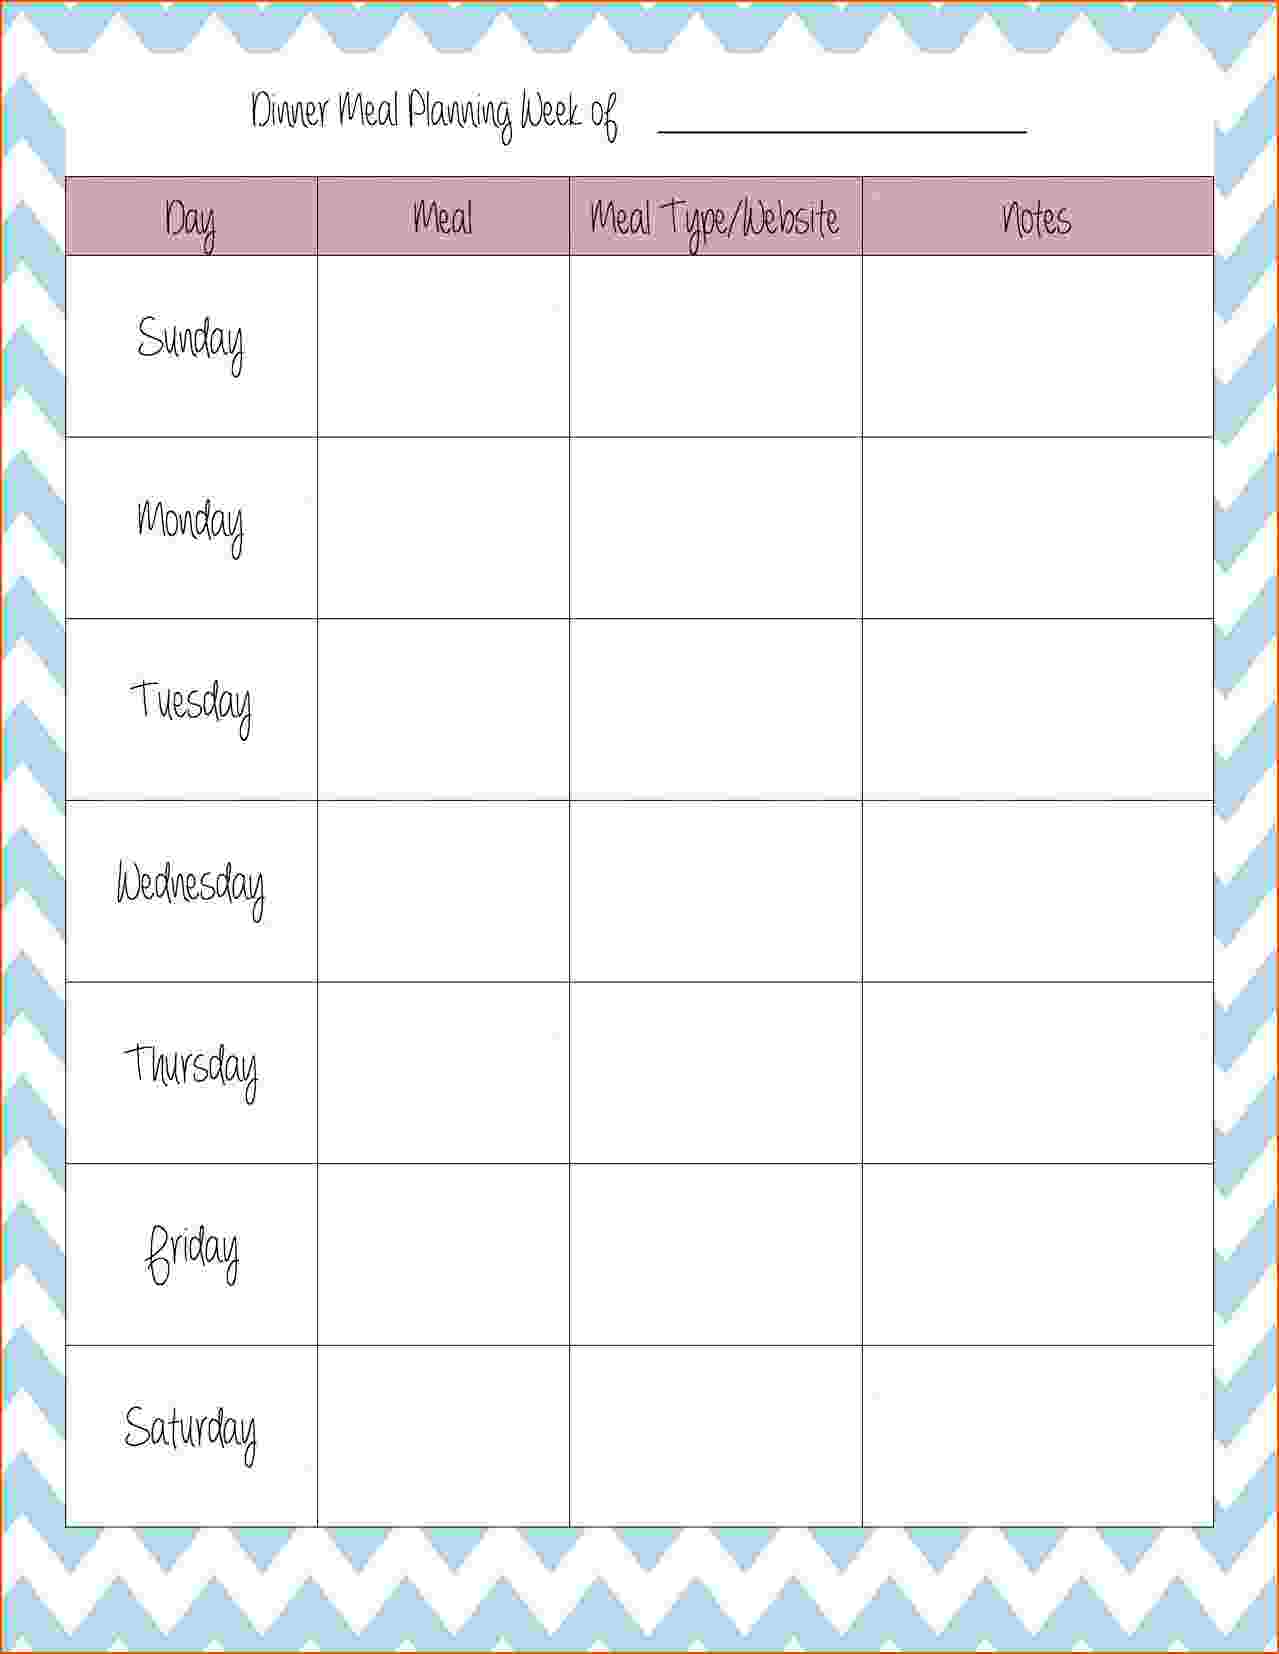 printable monthly meal planner template